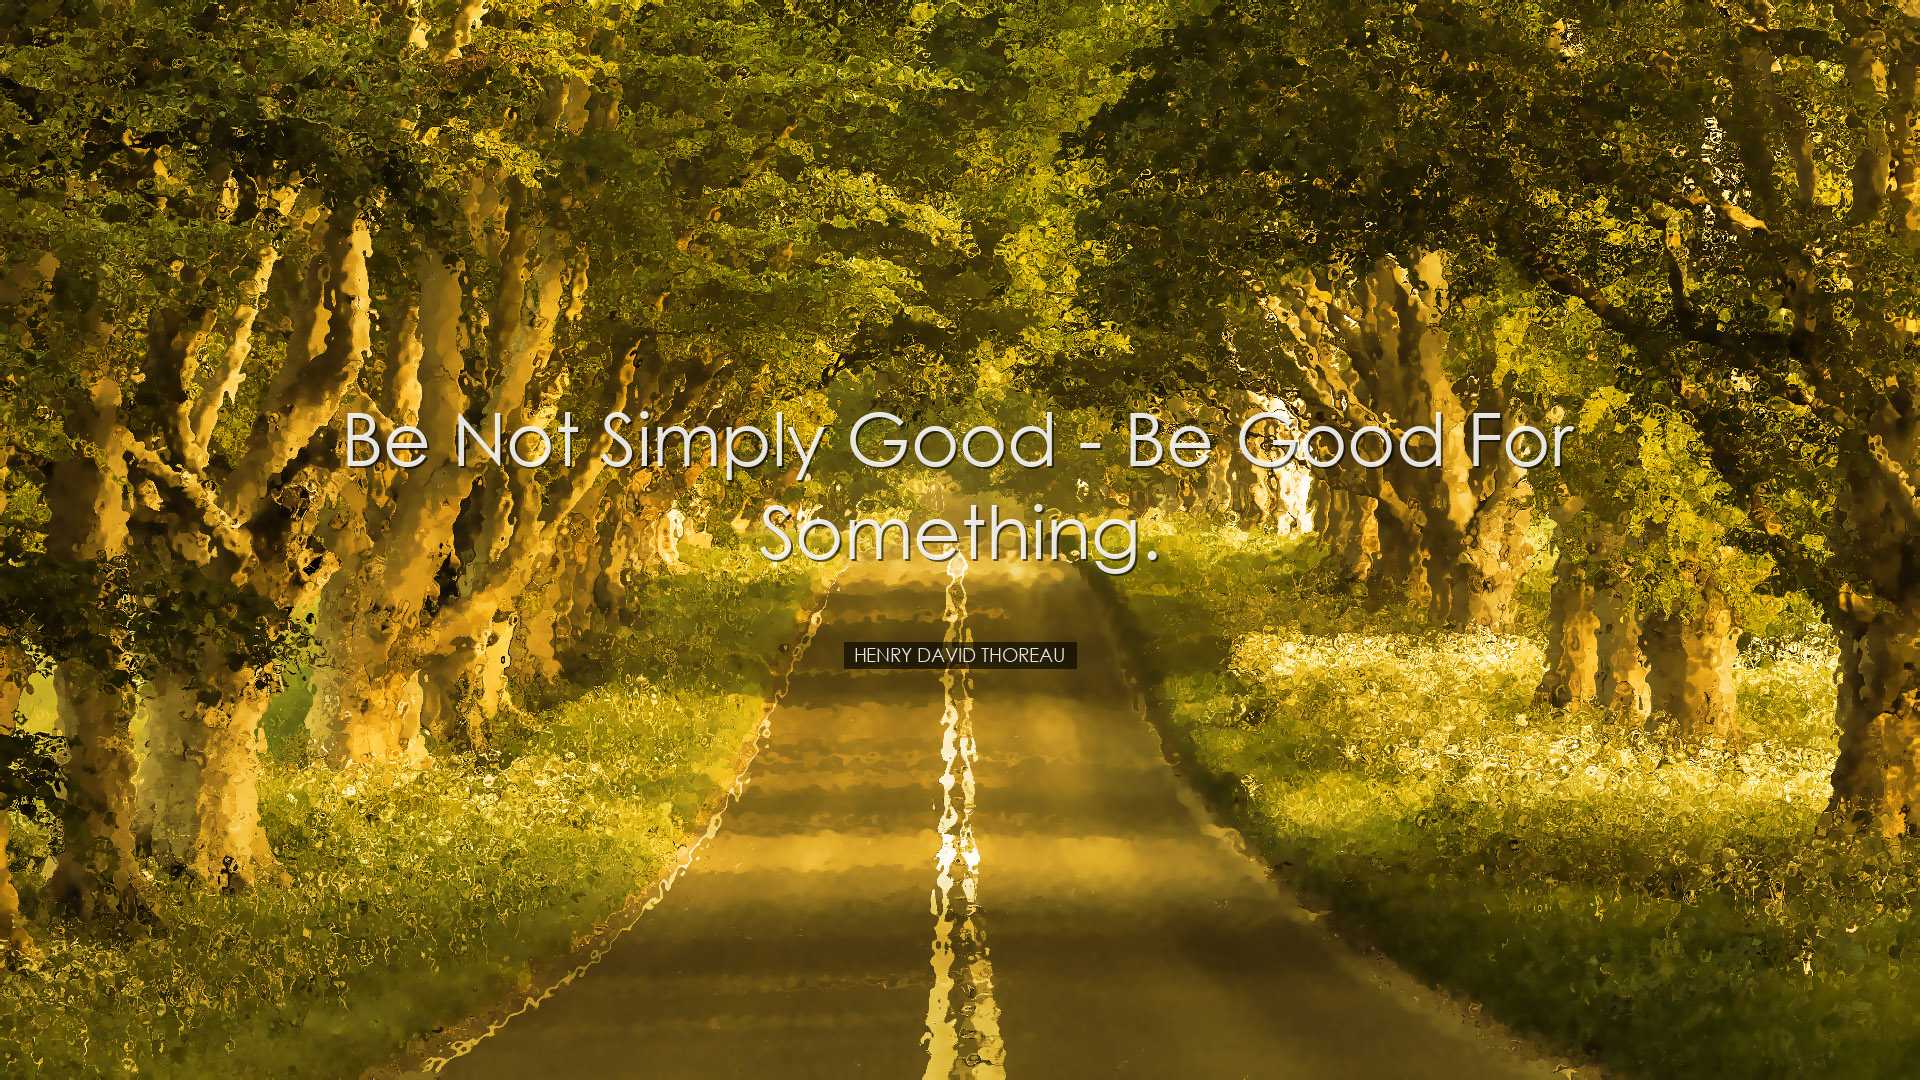 Be not simply good - be good for something. - Henry David Thoreau